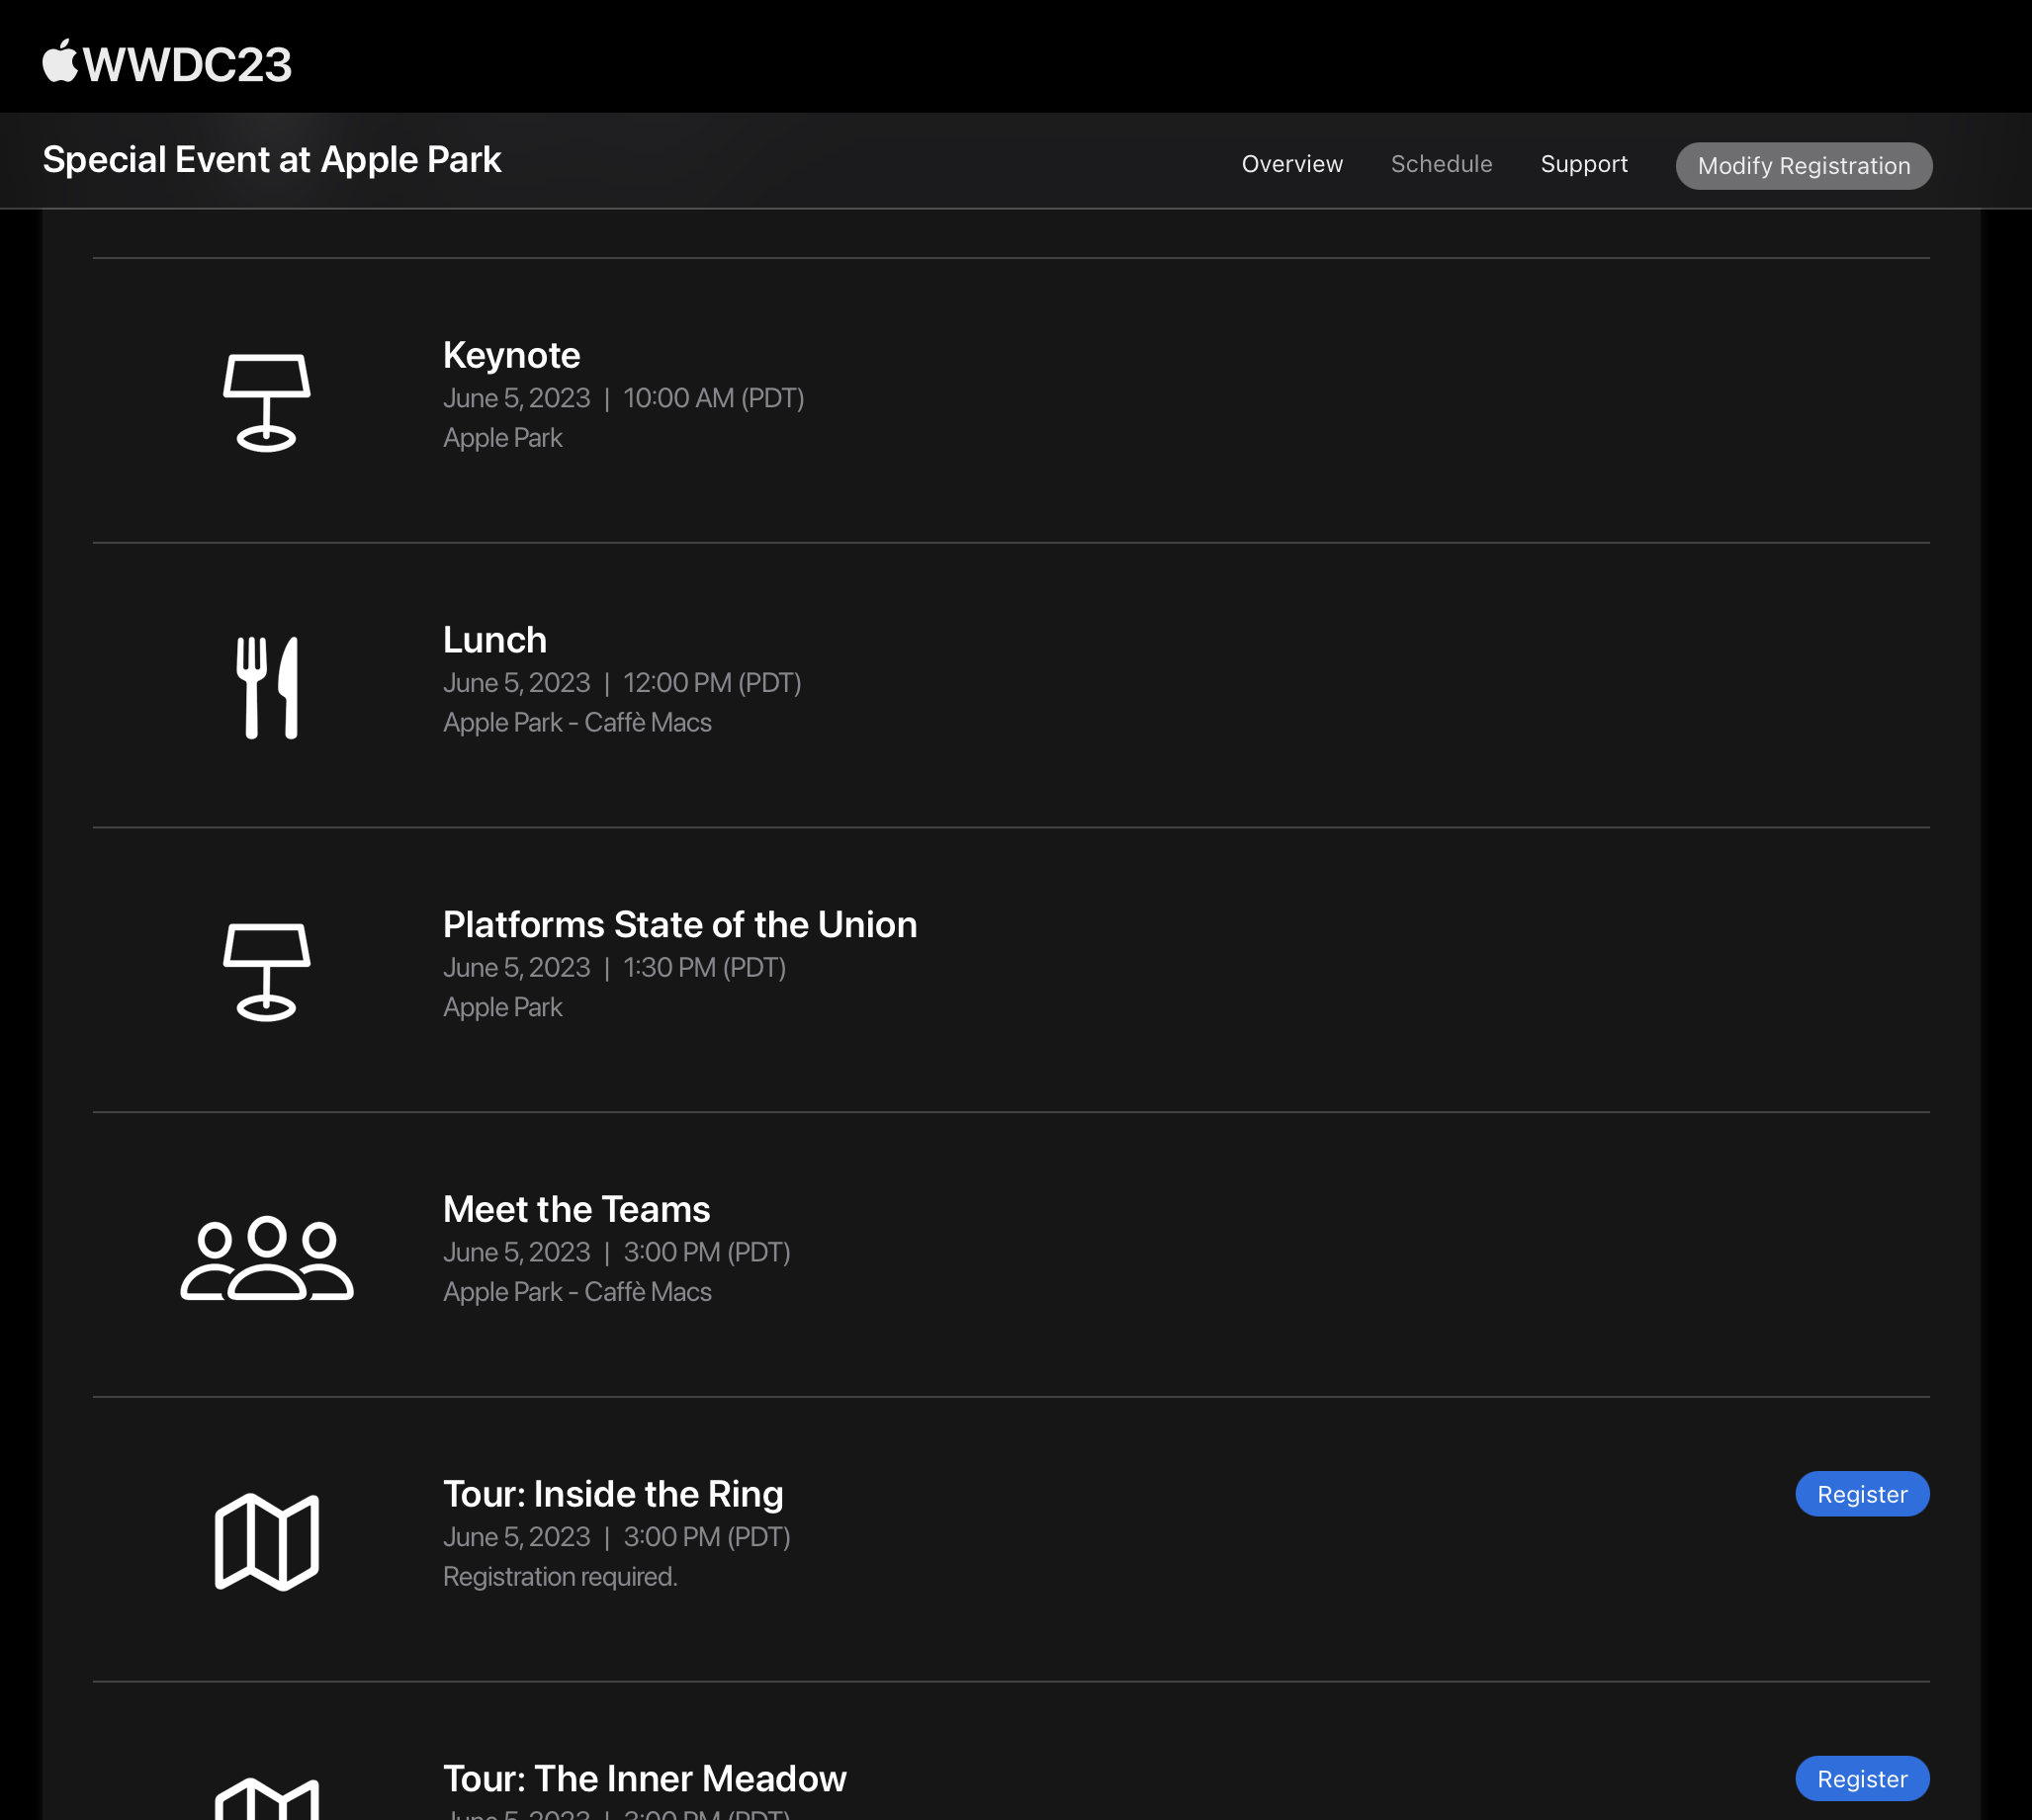 WWDC23 - Programma Special Event at Apple Park